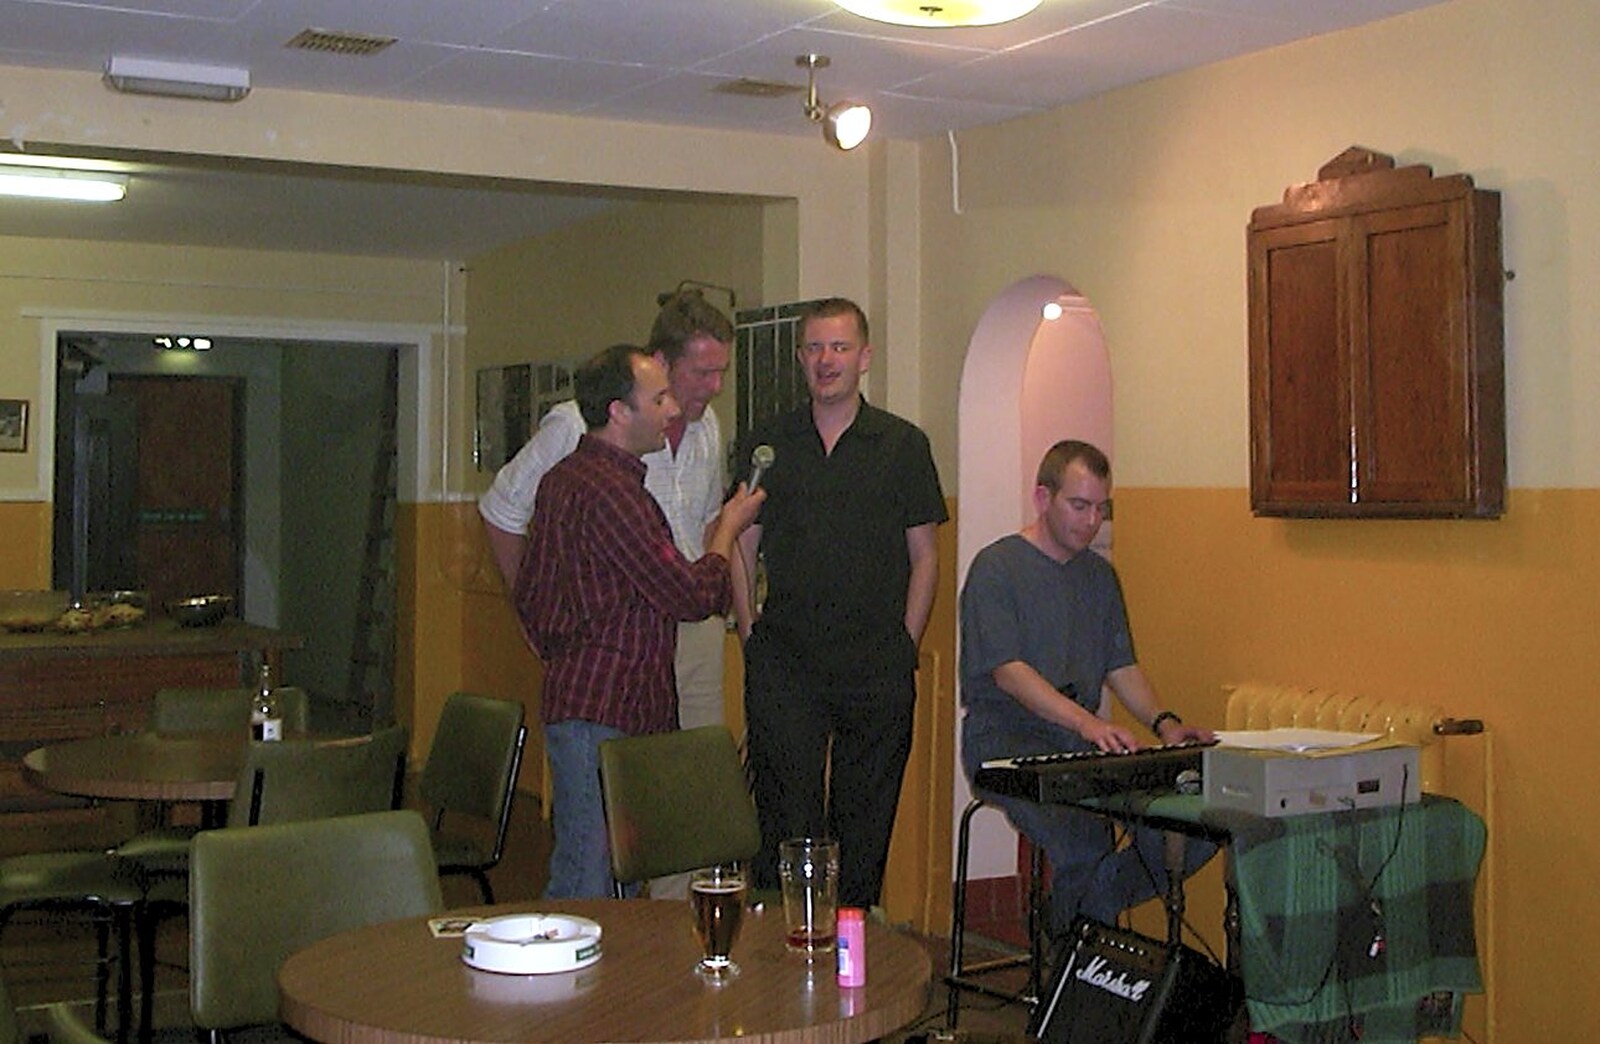 Nosher is persuaded to sing something from Golden Jubilee Celebrations, The Village Hall, Brome, Suffolk - 4th June 2002